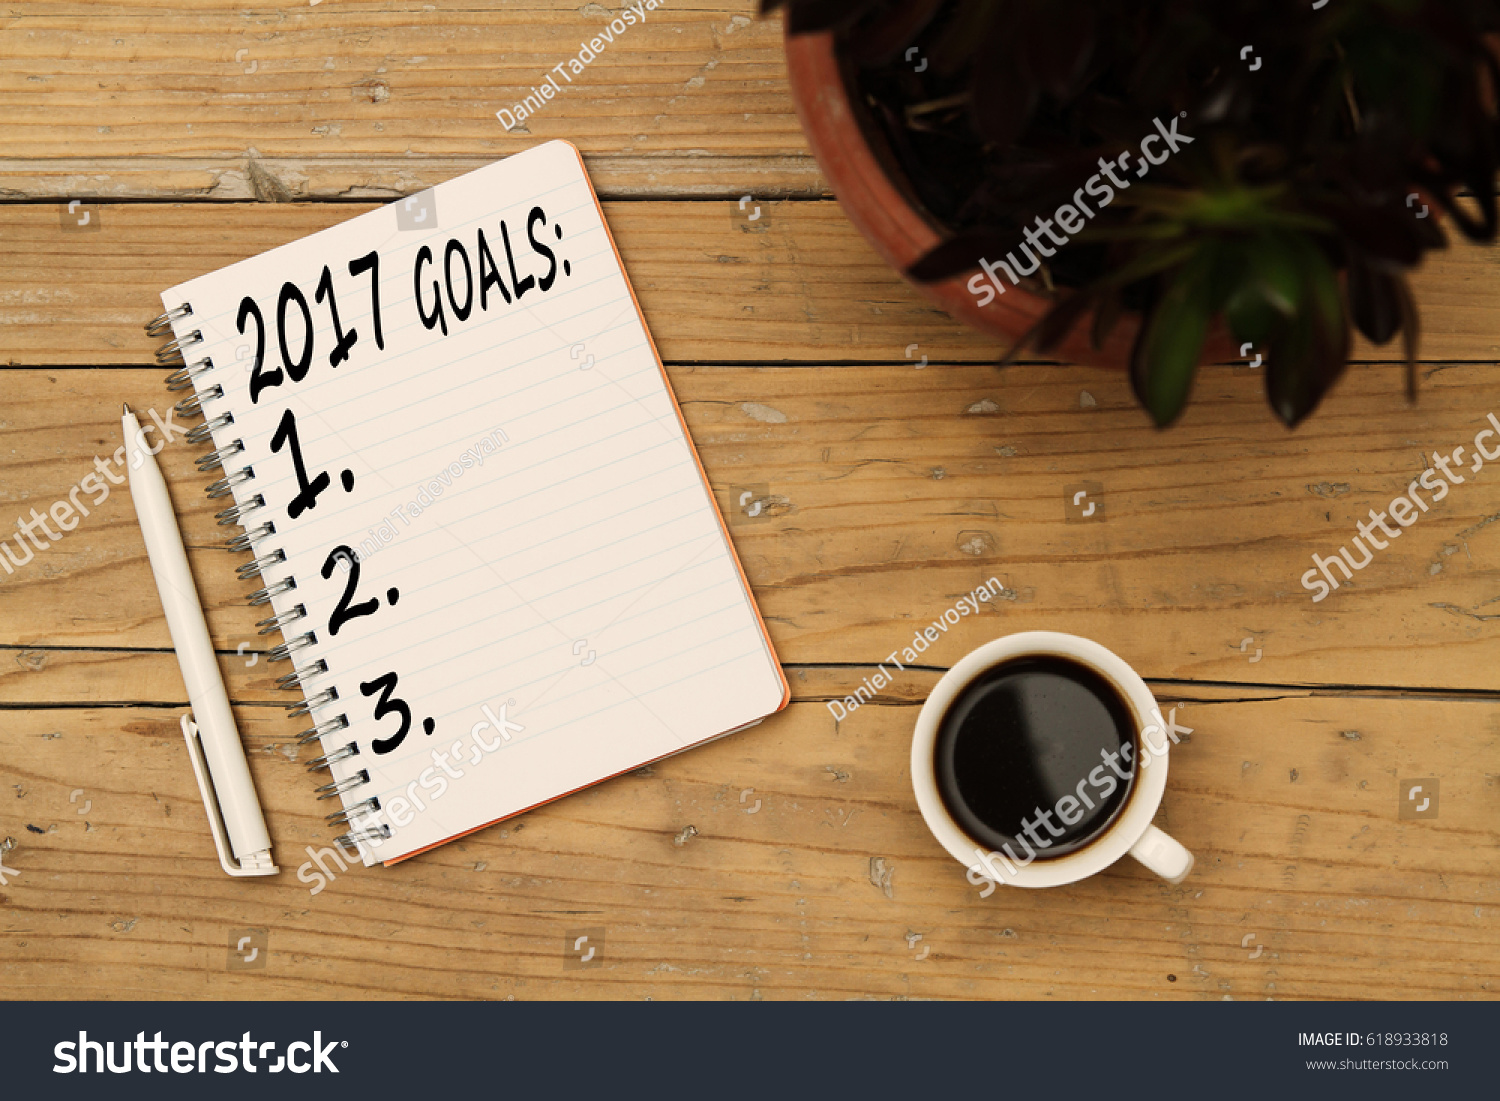 Top view 2017 goals list with notebook, flower, cup of coffee on wooden desk #618933818